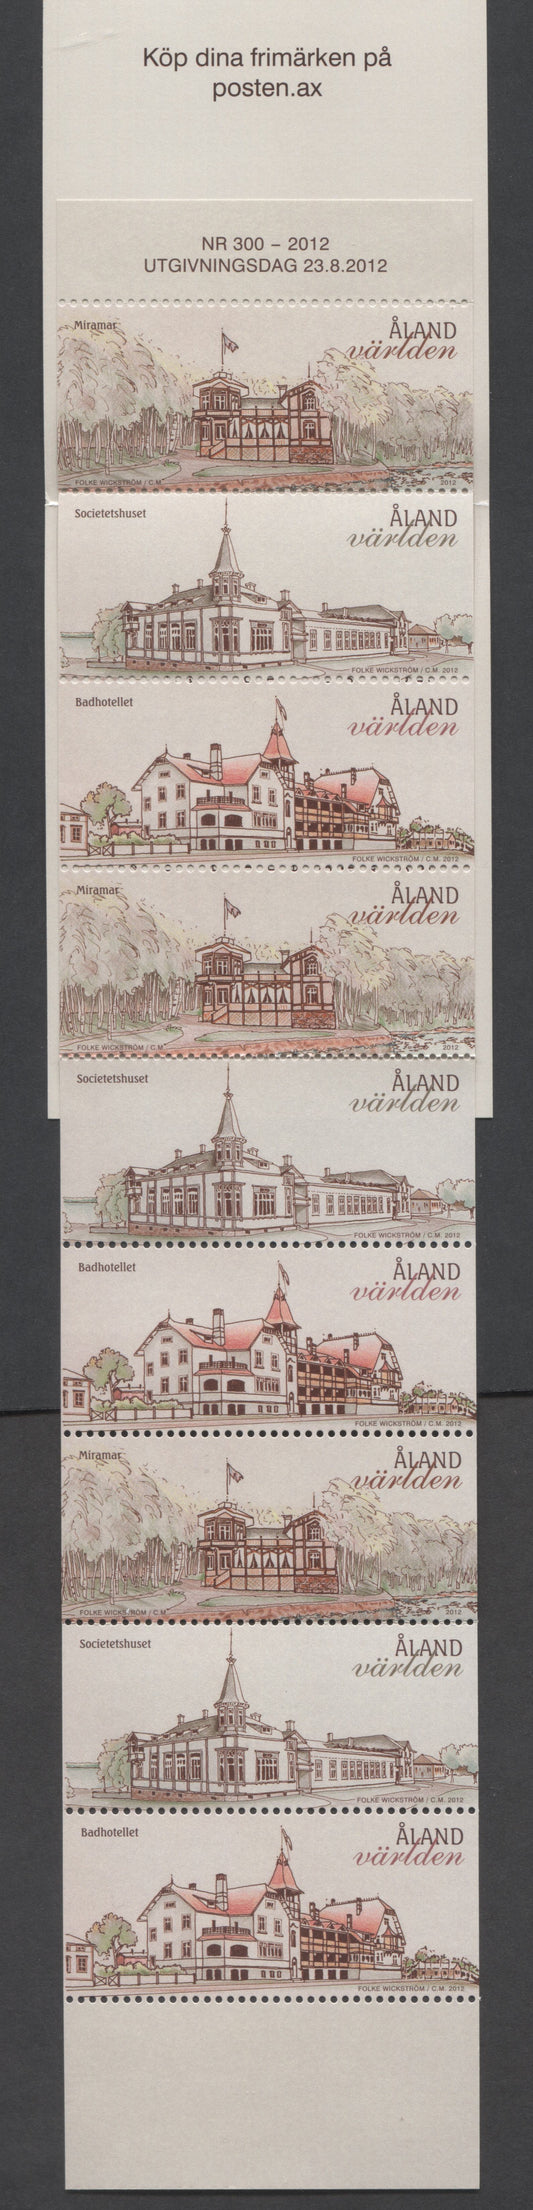 Lot 180 Aland Islands SC#334d  2012 Architecture Issue, A VFNH Booklet Of 9, Click on Listing to See ALL Pictures, 2017 Scott Cat. $24